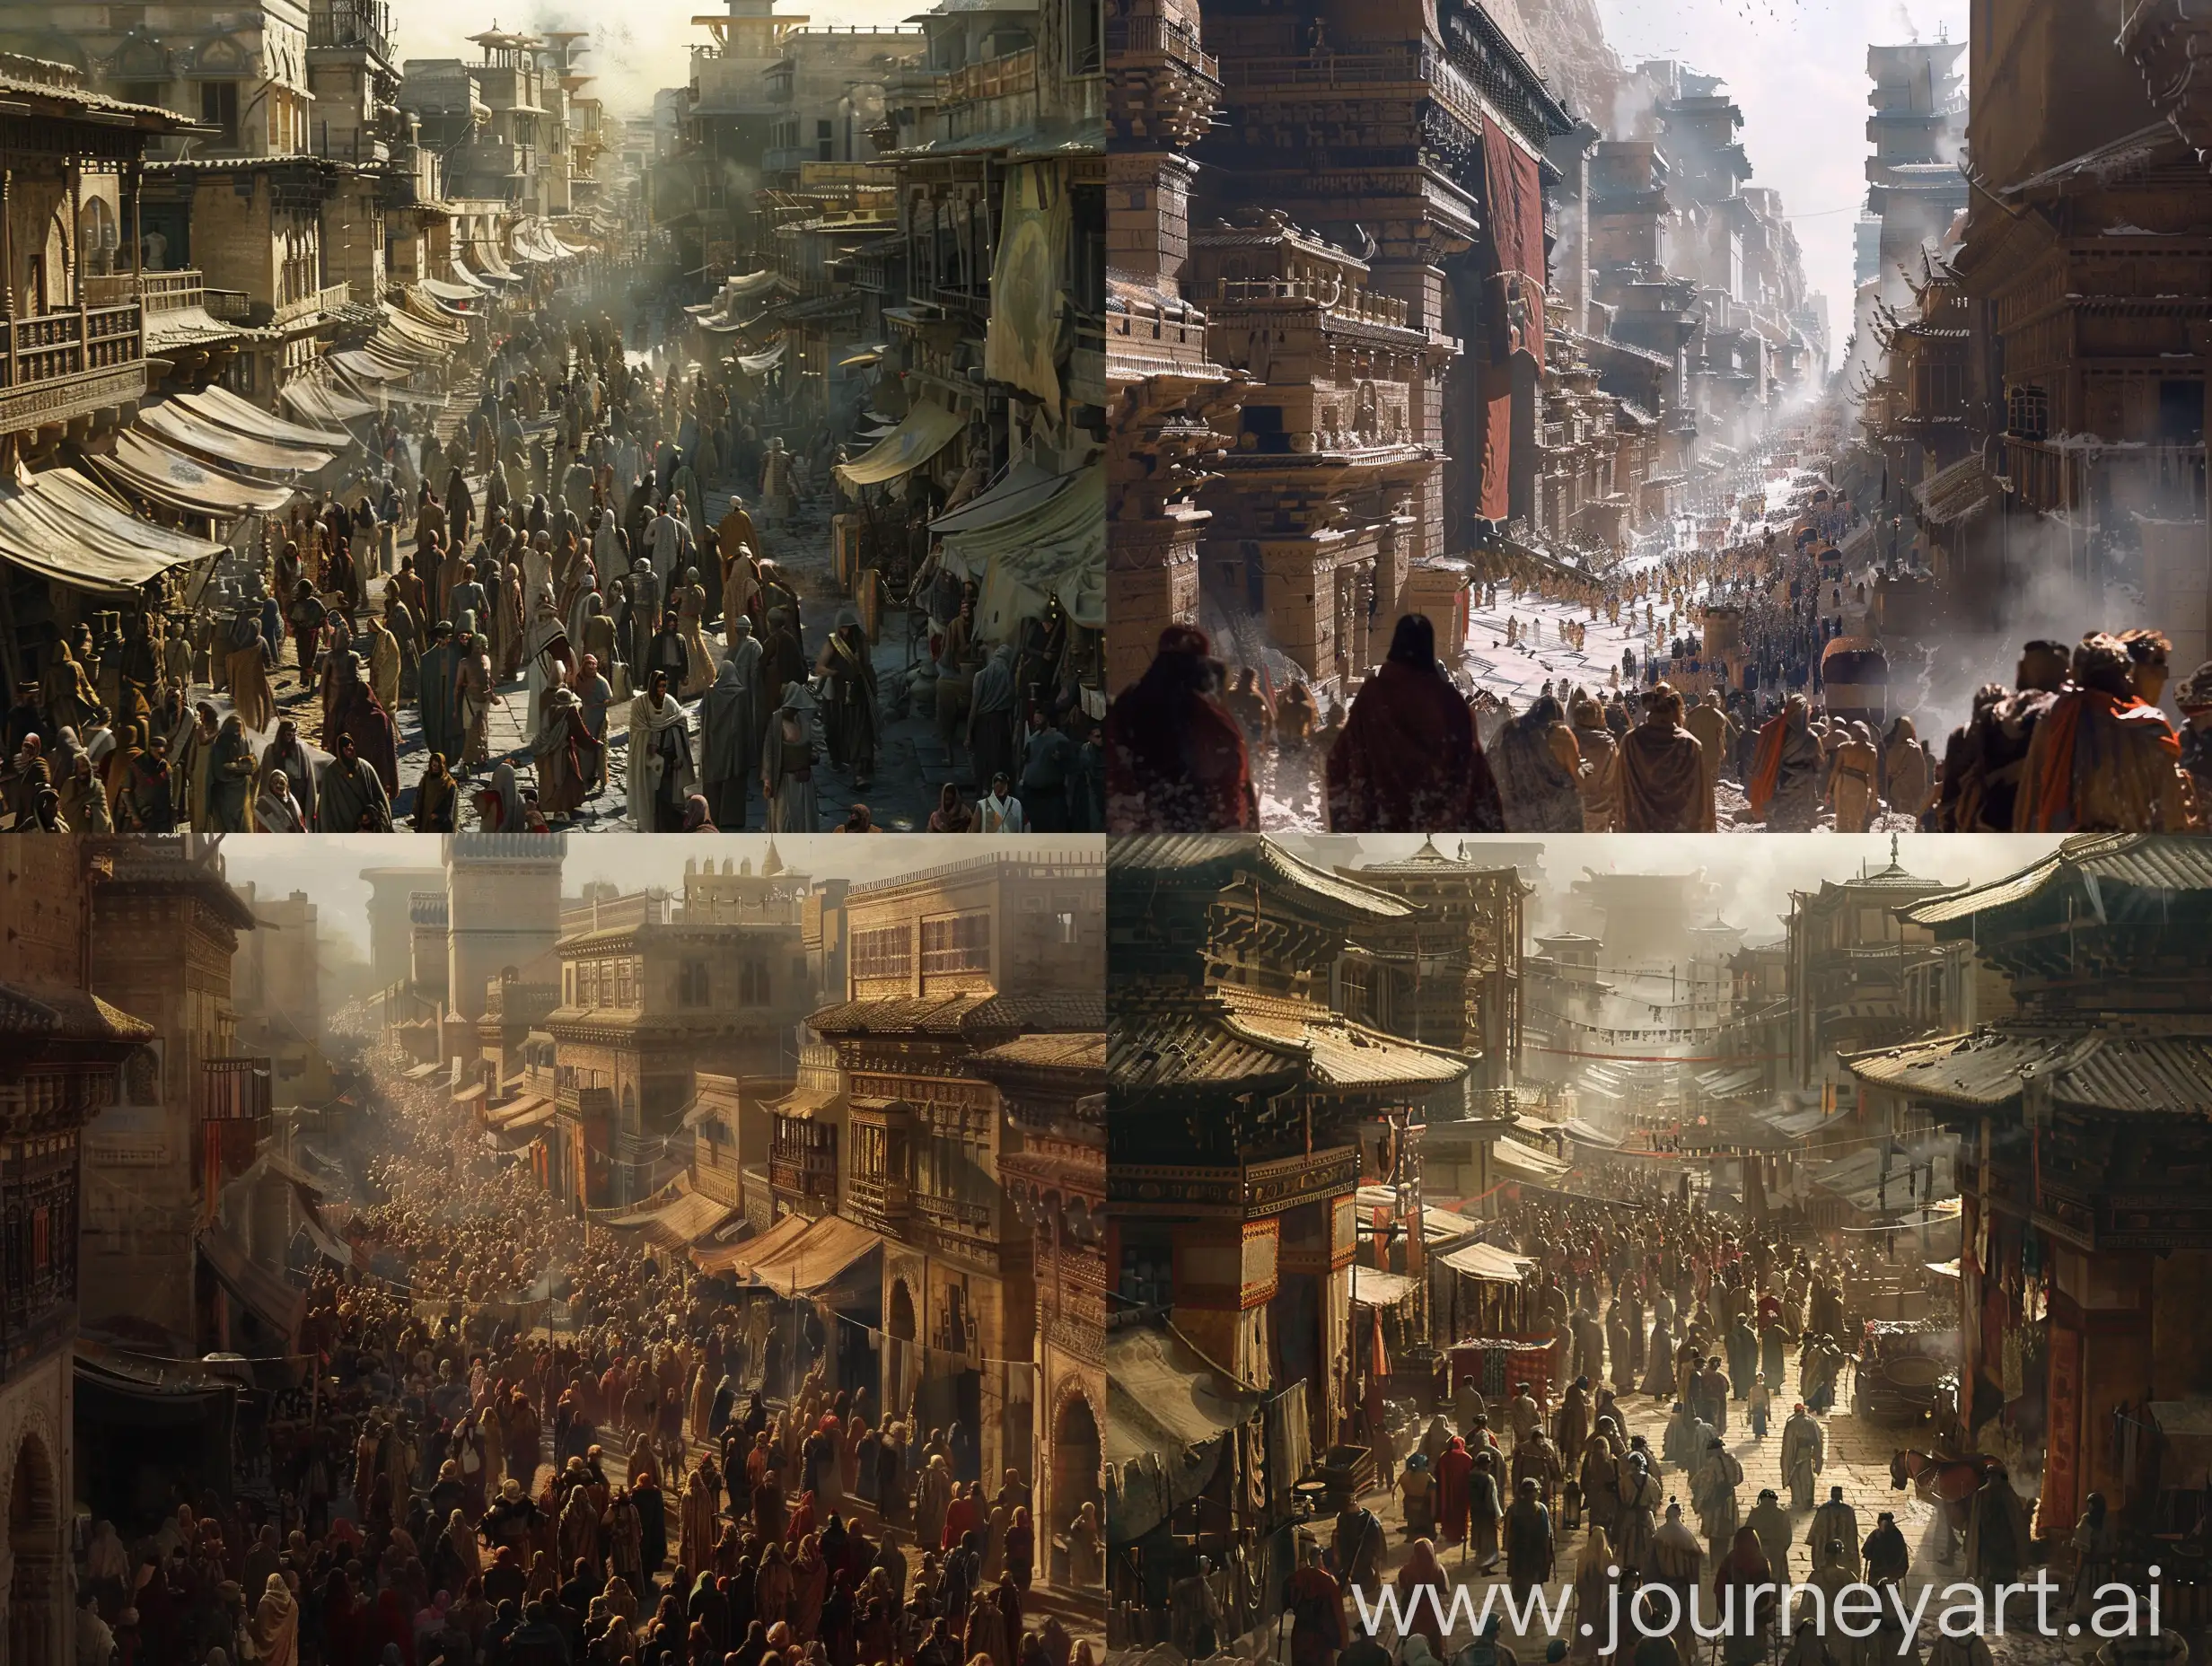 crowded bronze age city street, steppe biome, architecture like Shang Dynasty and Indus Valley Civilisation and Mesoamerican Civilization and Aegean Civilization and Mesopotamia, 19th century academic realist painting, matte painting, concept art, horror, apocalyptic, ominous, stygian, gloaming, caliginous, somber, grim